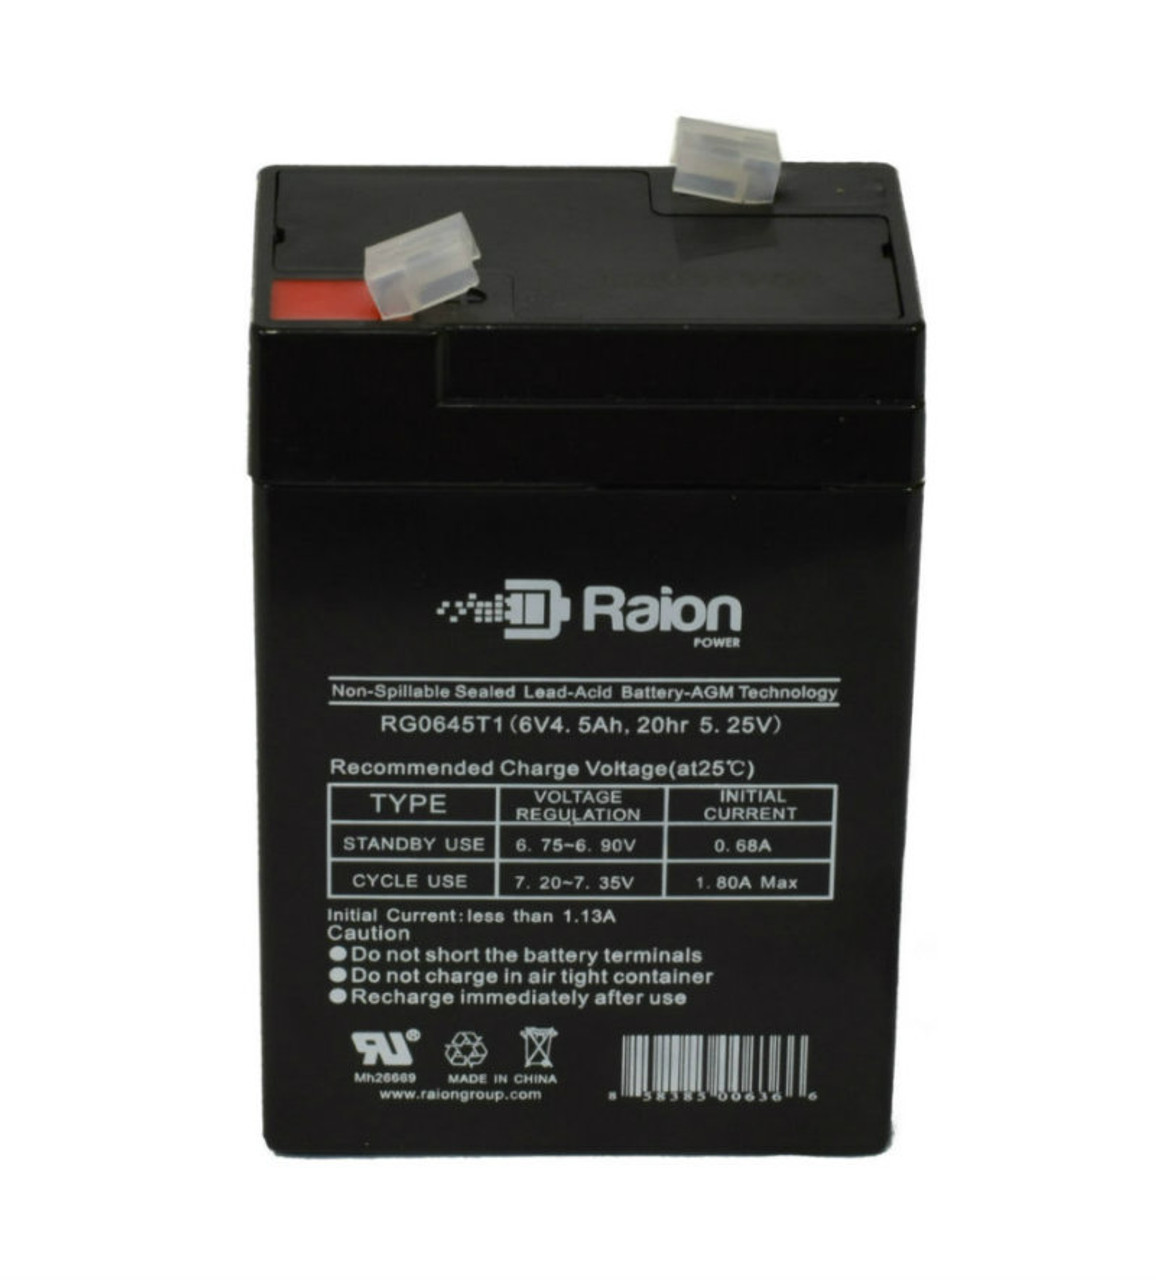 Raion Power RG0645T1 Replacement Battery Cartridge for Powersonic DH54